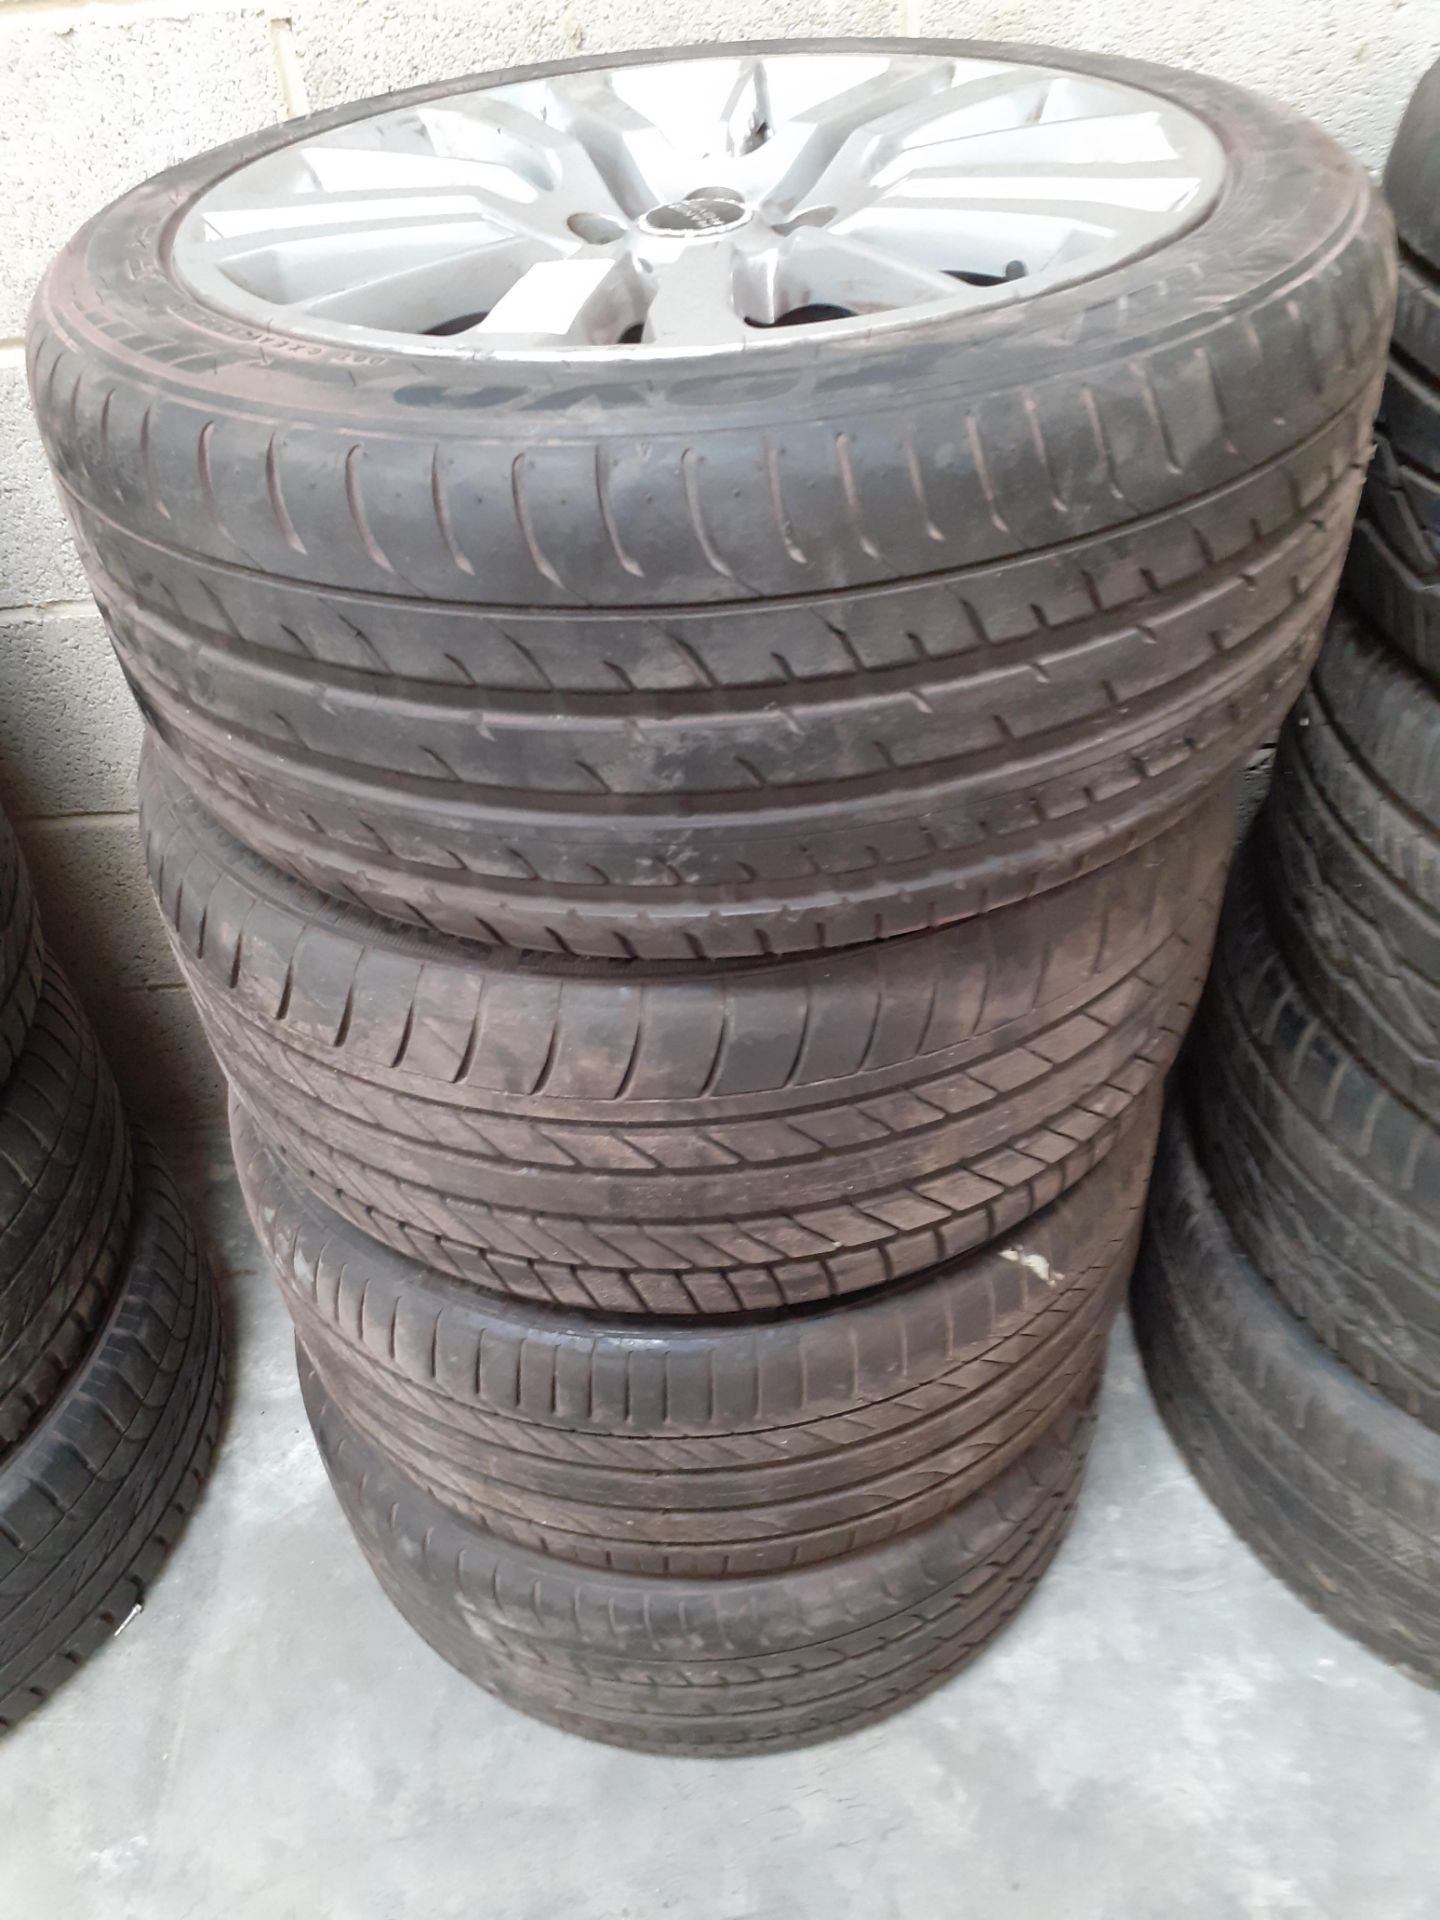 4 x LAND ROVER RANGE ROVER ALLOY WHEELS WITH TYRES 275 40 20, 6mm TREAD *NO VAT* - Image 2 of 2